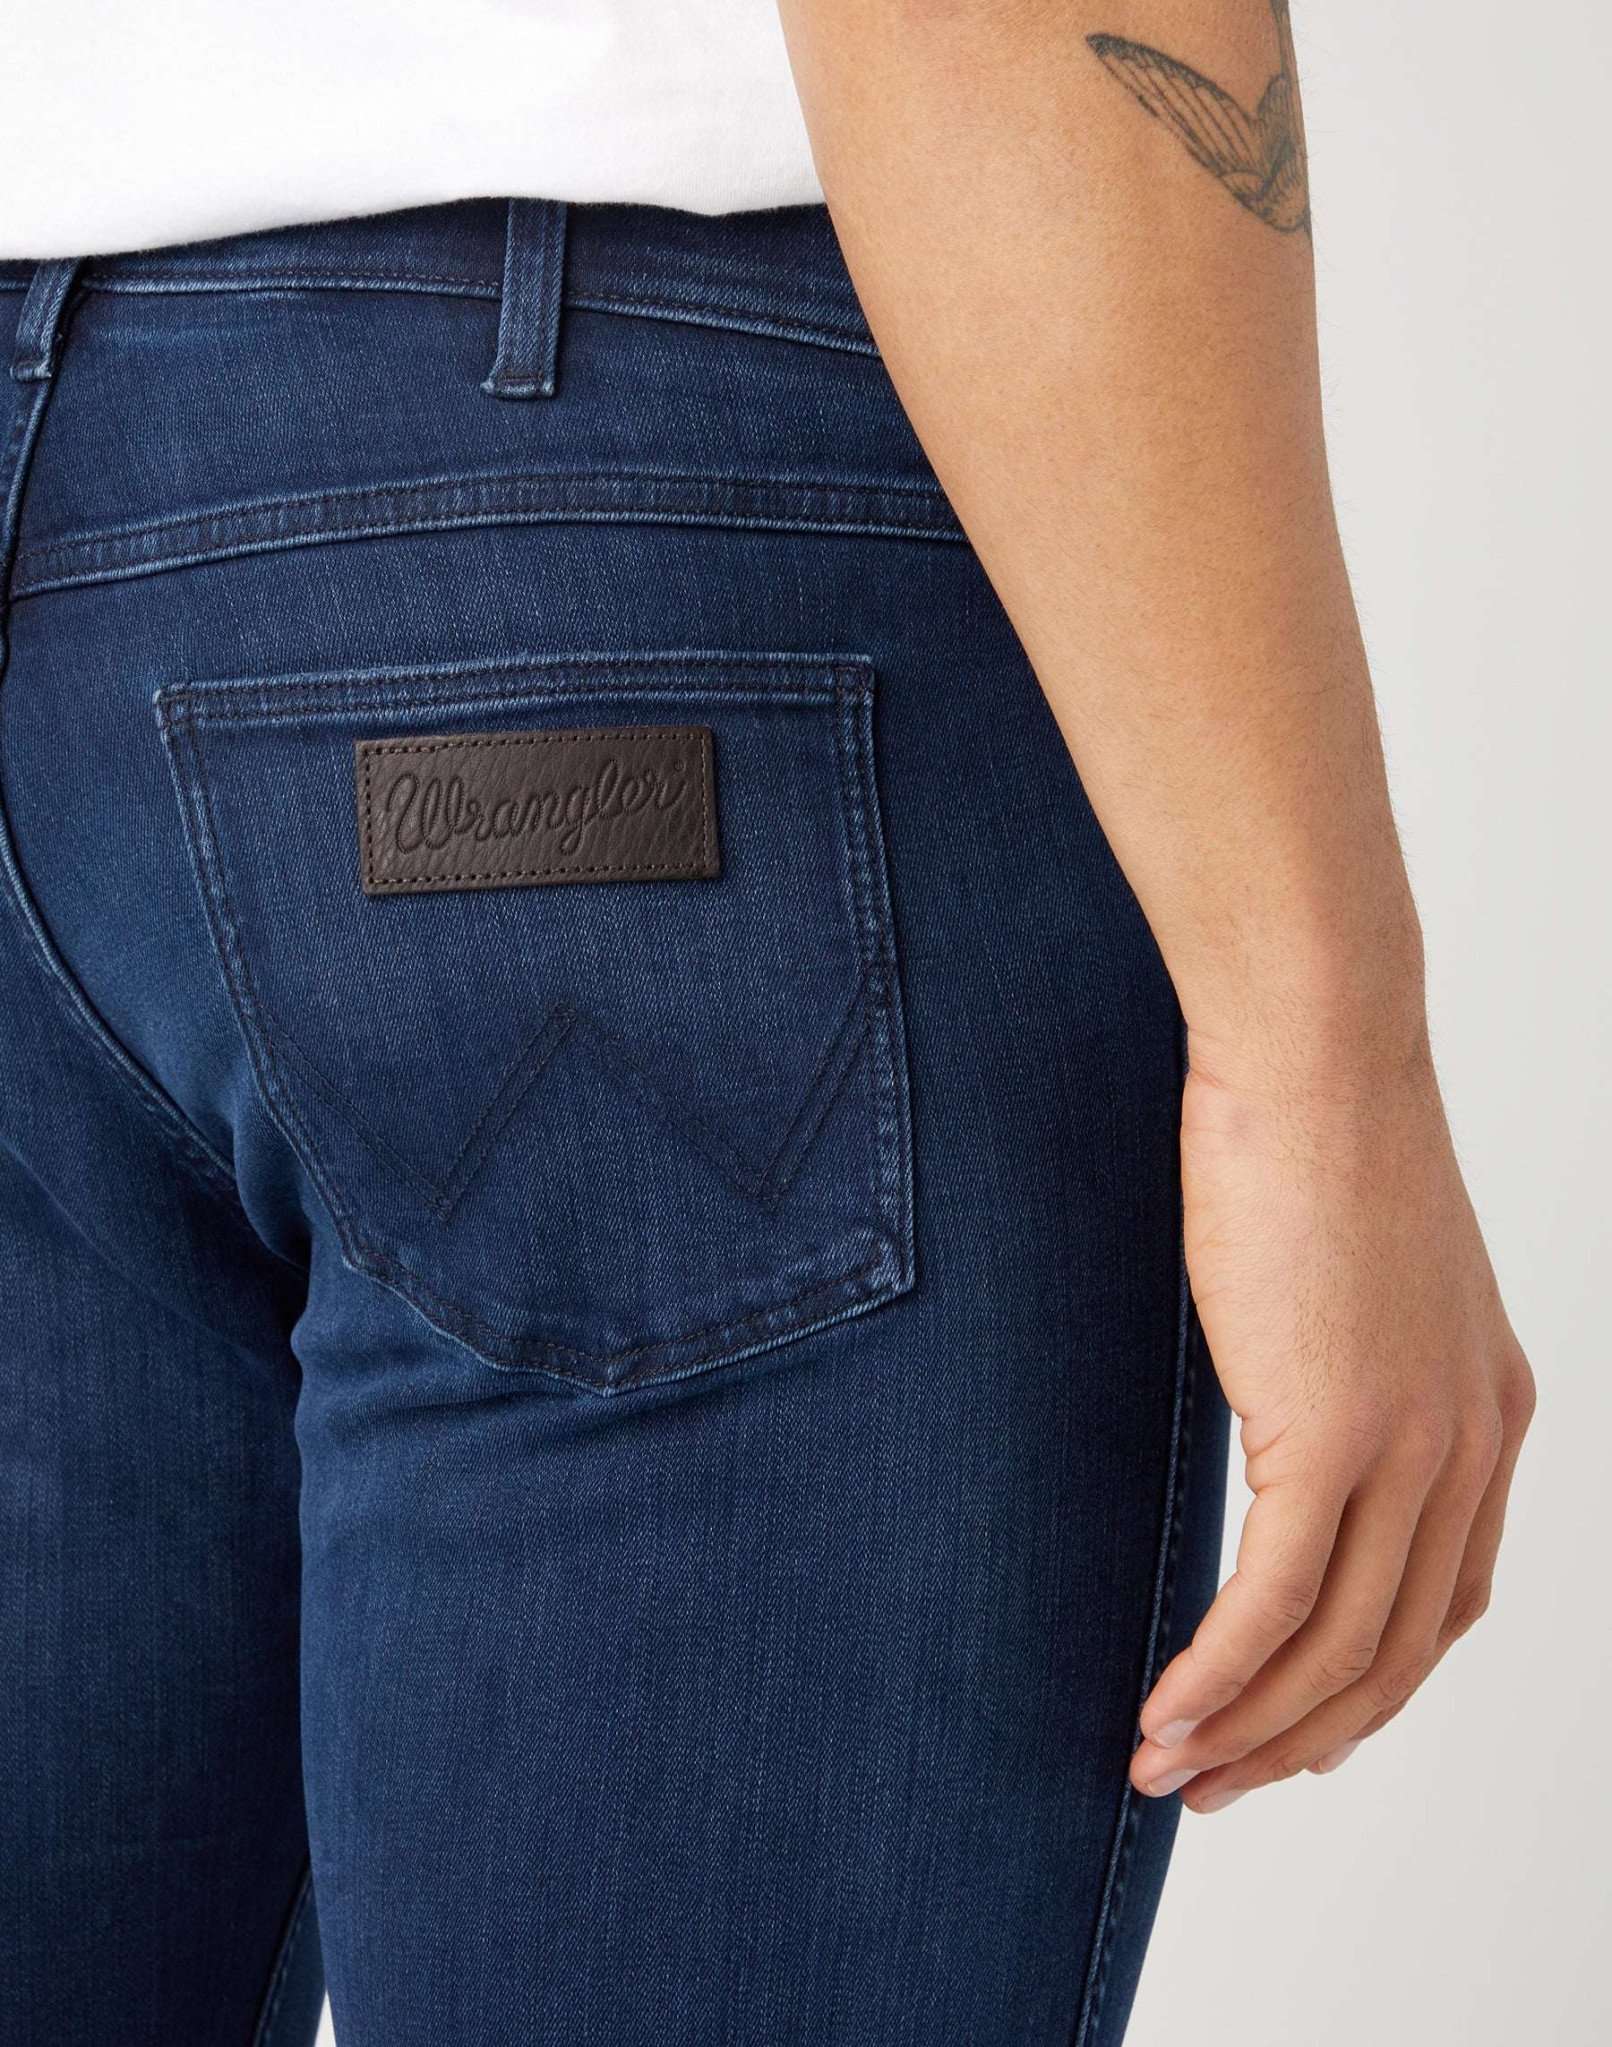 Greensboro in Arm Strong Jeans Wrangler   